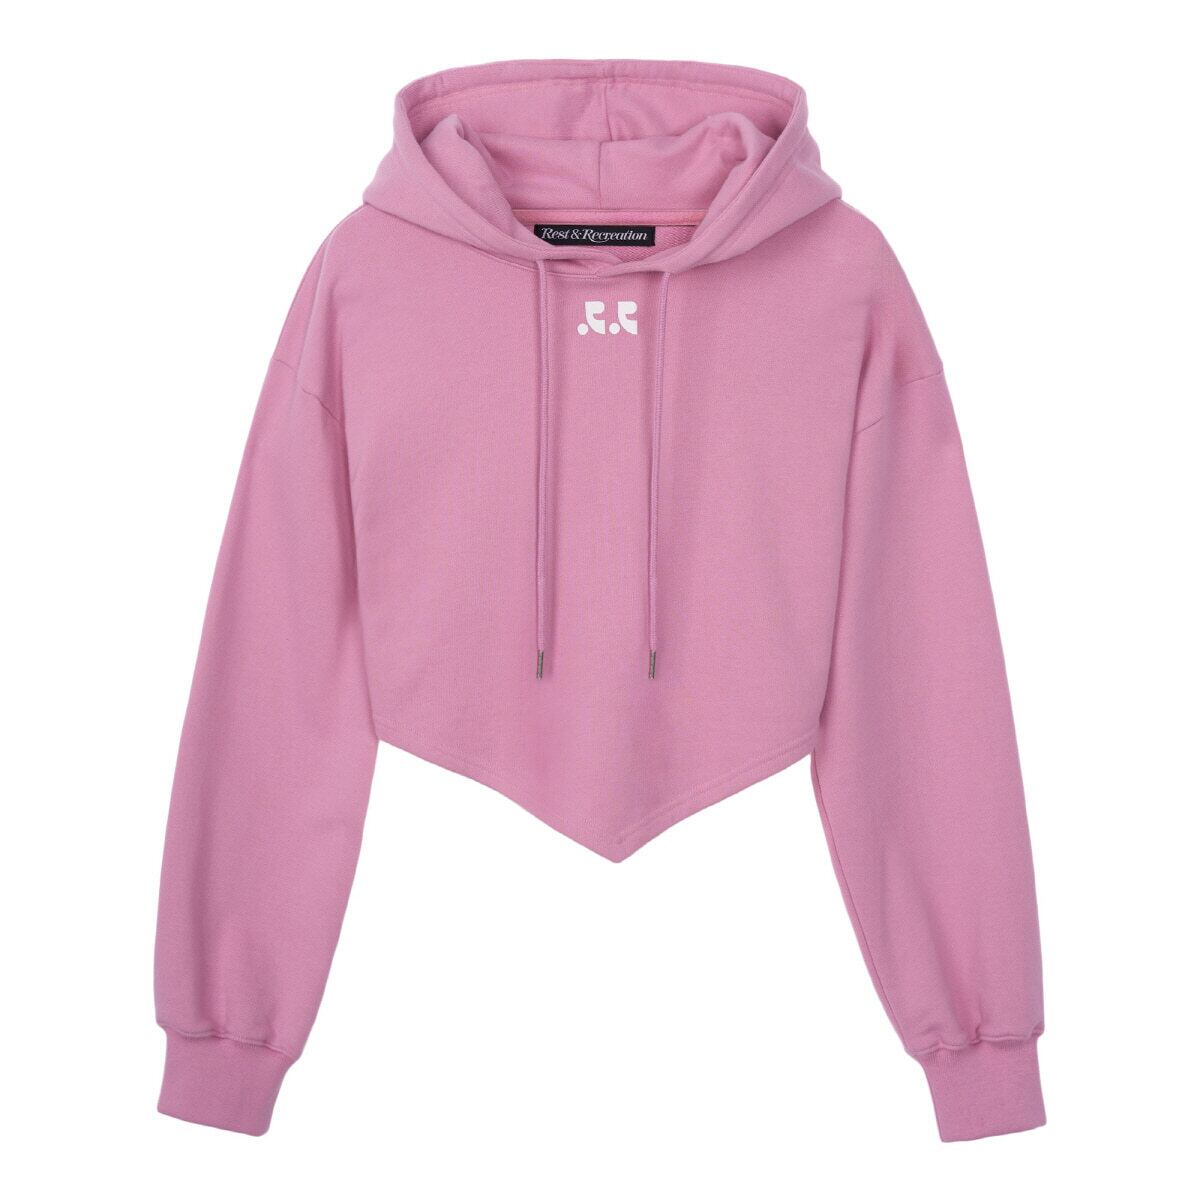 rest & recreation] RR ARROW POINT HOODIE - PINK 正規韓国ブランド